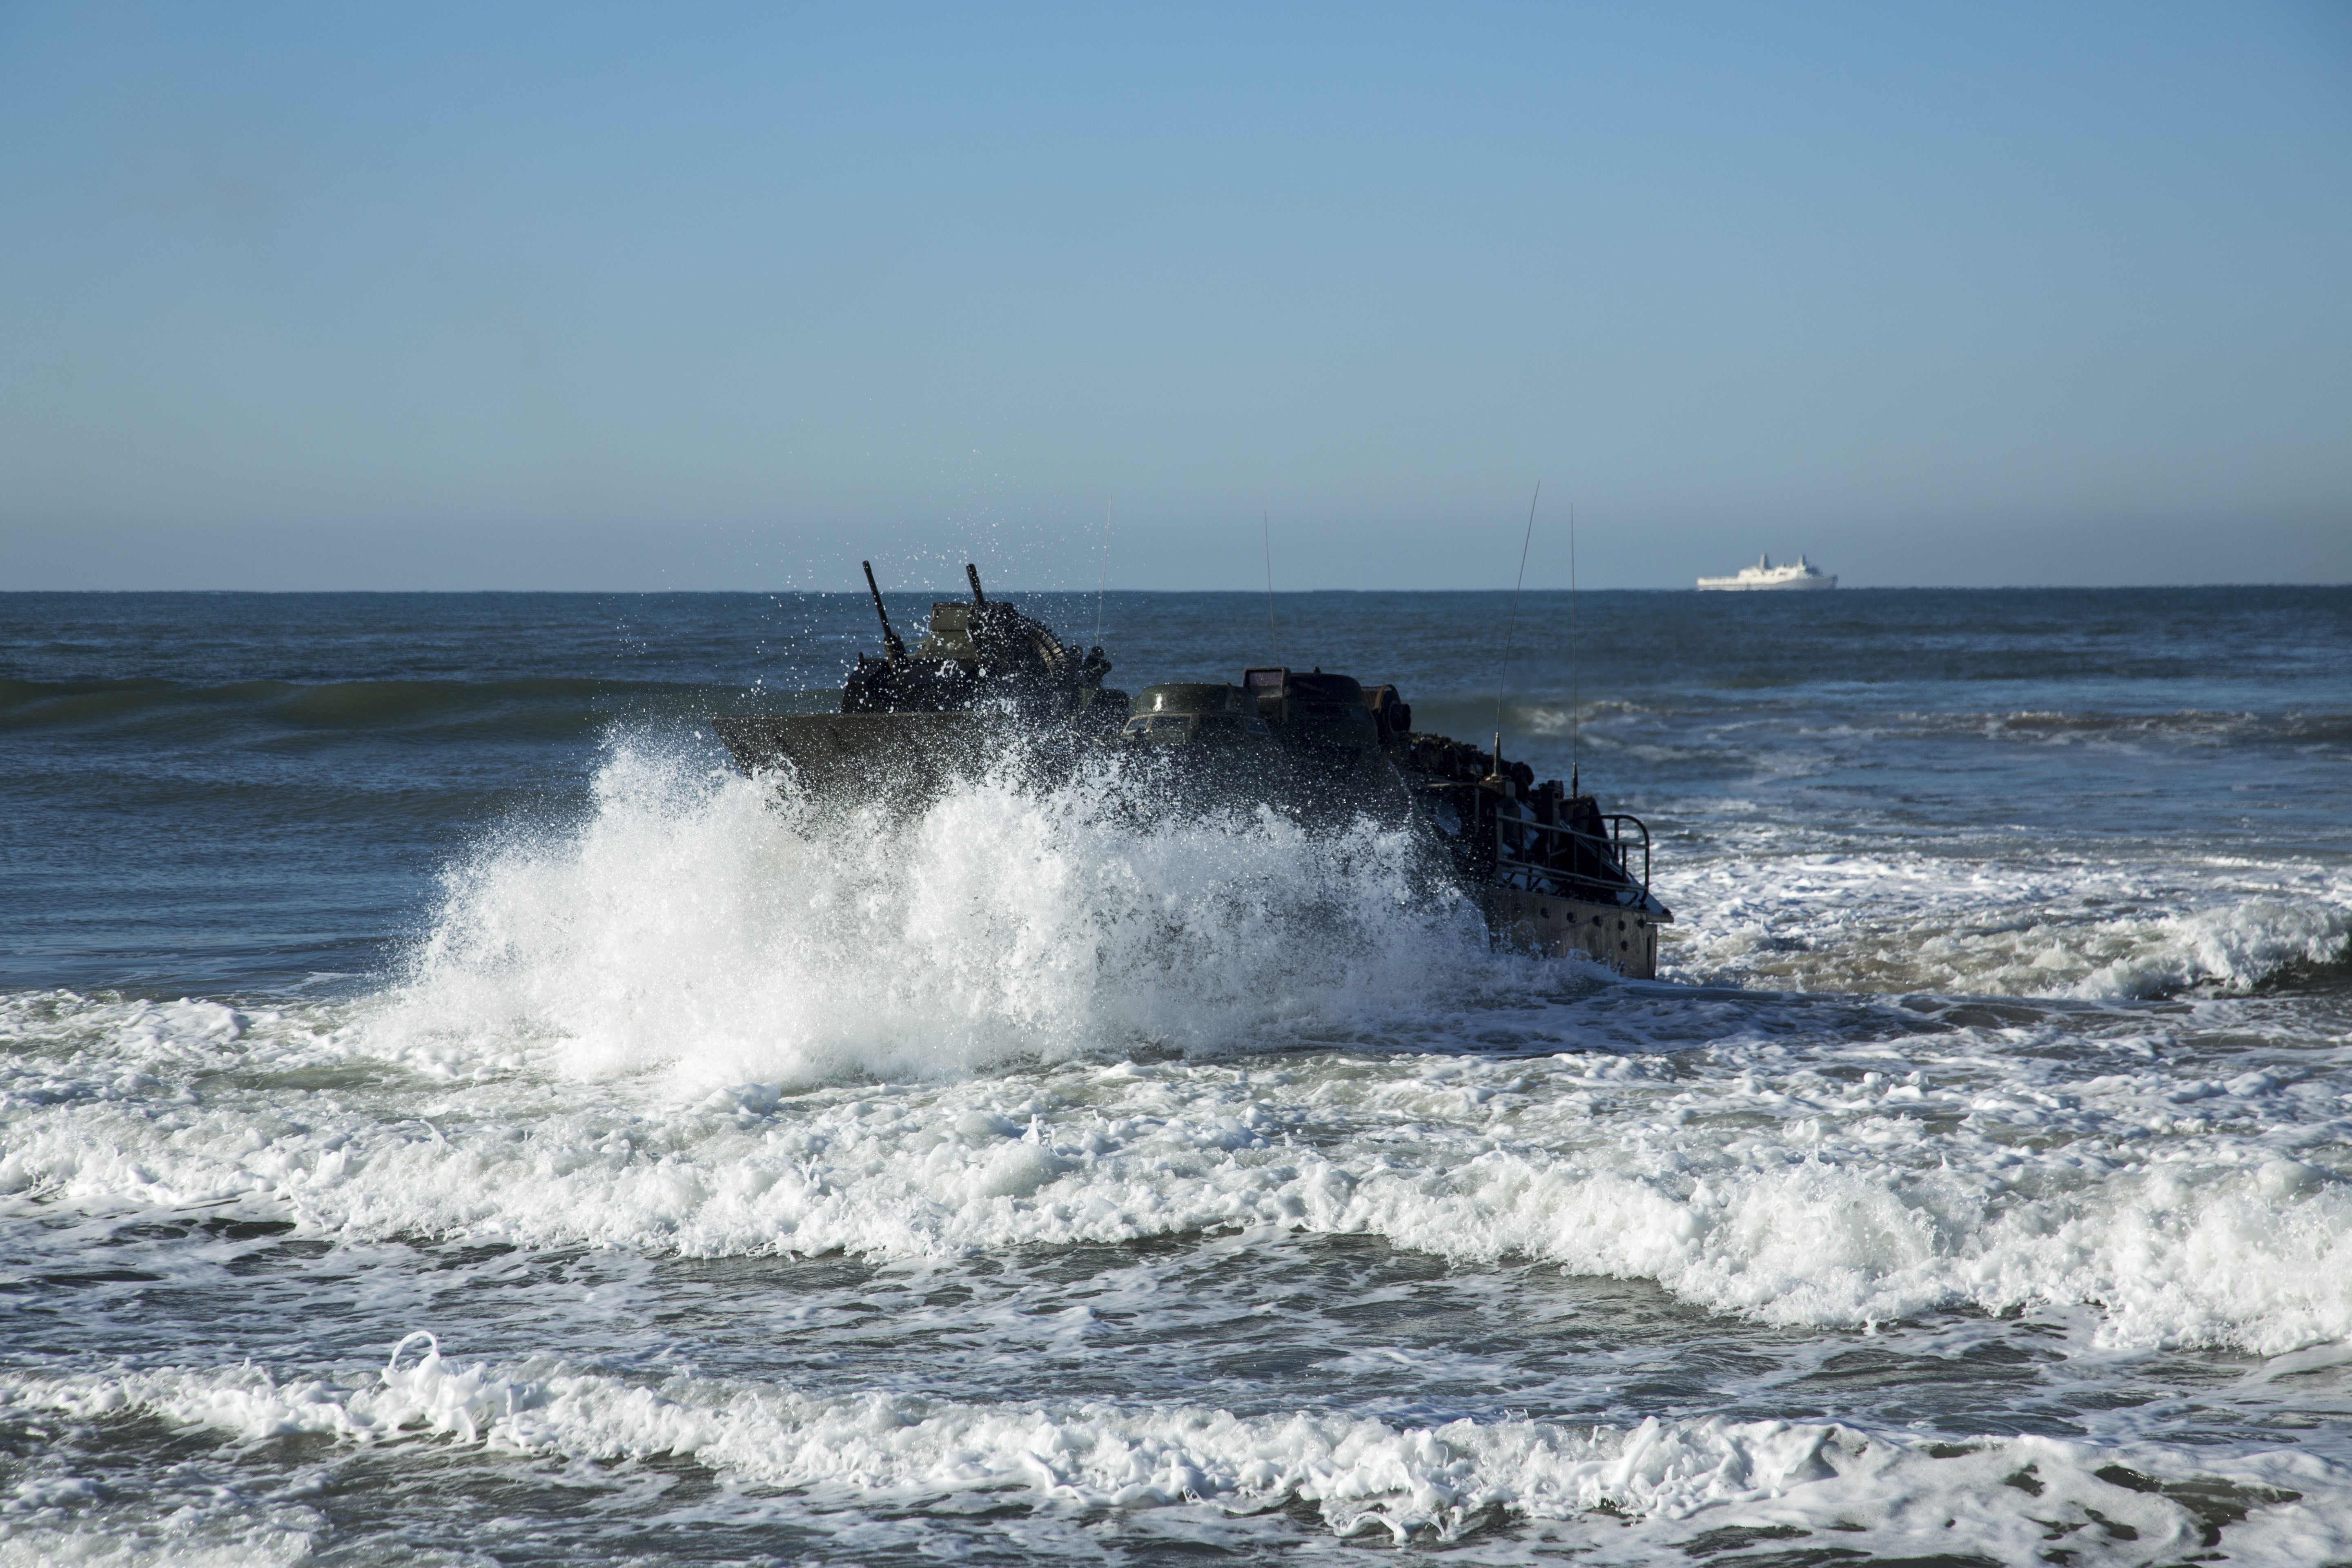 US Marine Corps Assault Amphibious Vehicles, manned by Japan Ground Self Defense Force soldiers land on Red Beach Training Area, during Exercise Iron Fist 2017, aboard Marine Corps Base Camp Pendleton, Calif. on Feb. 25, 2017. US Marine Corps Photo